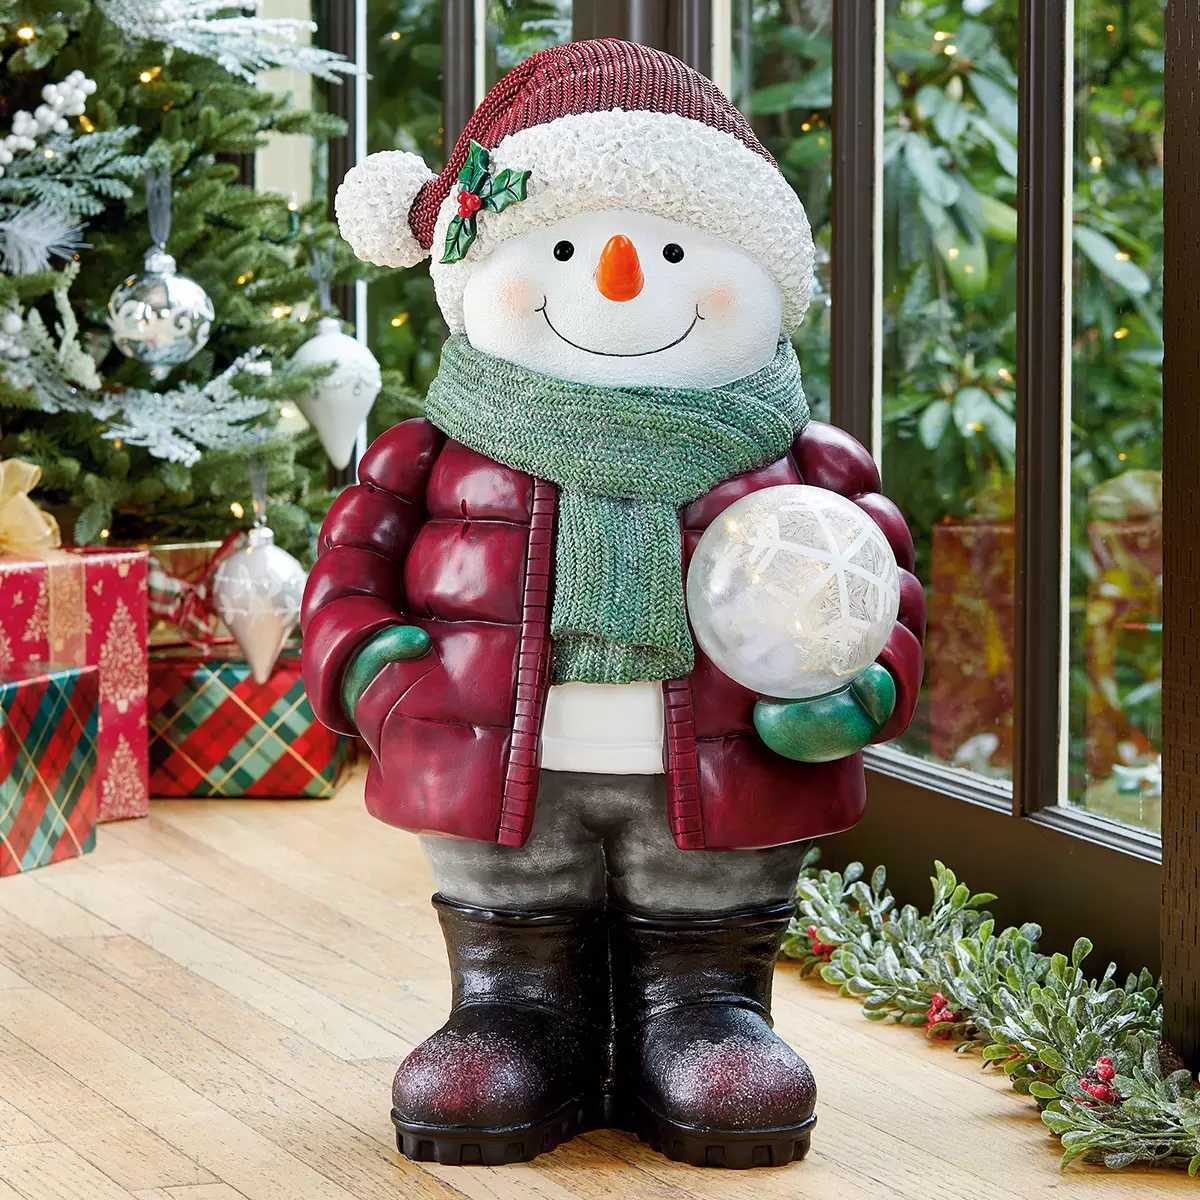 Buy Snowman Greeter with Glass LED Ball Lifestyle Image at Costco.co.uk